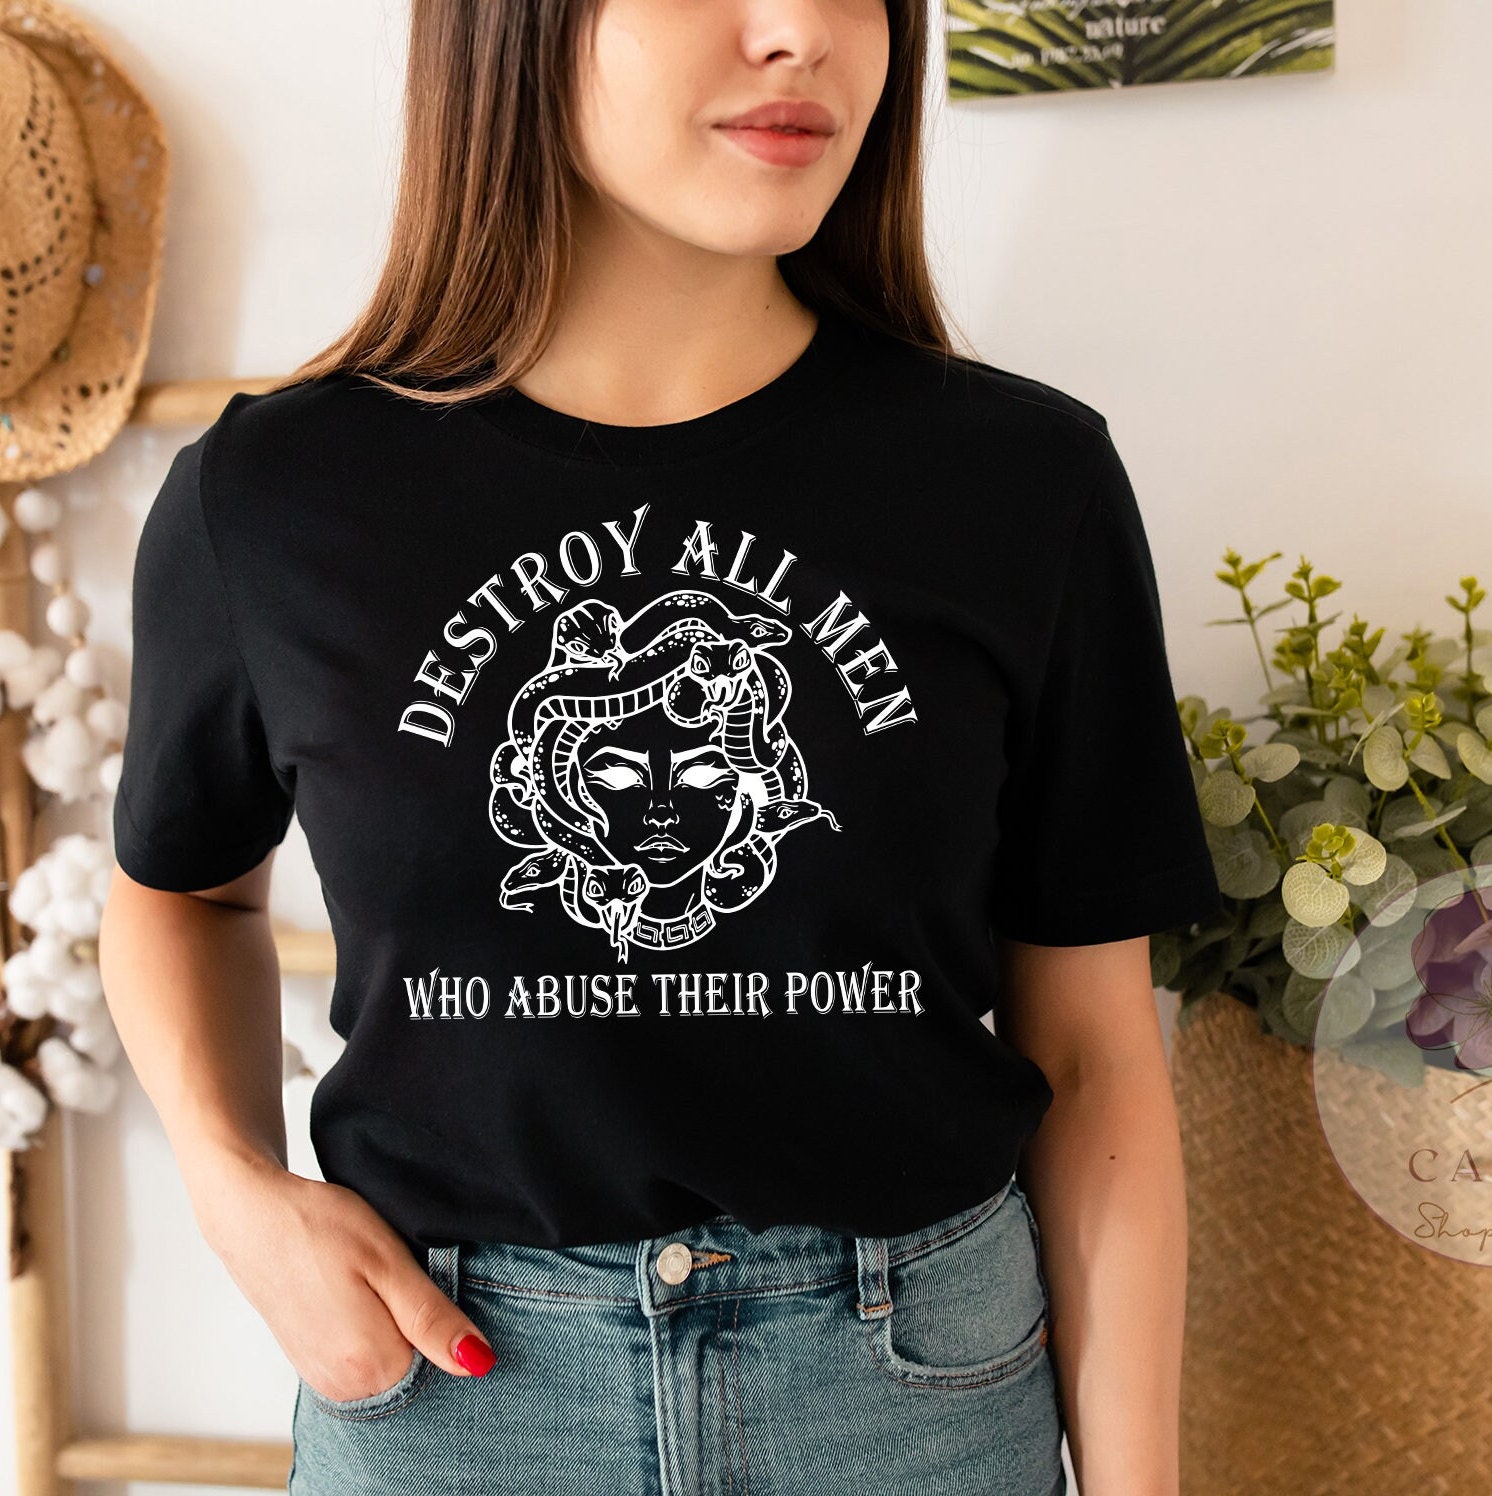 Destroy All Men Who Abuse Their Power Abortion Protest Pro Choice Women Rights Feminist Unisex T-Shirt